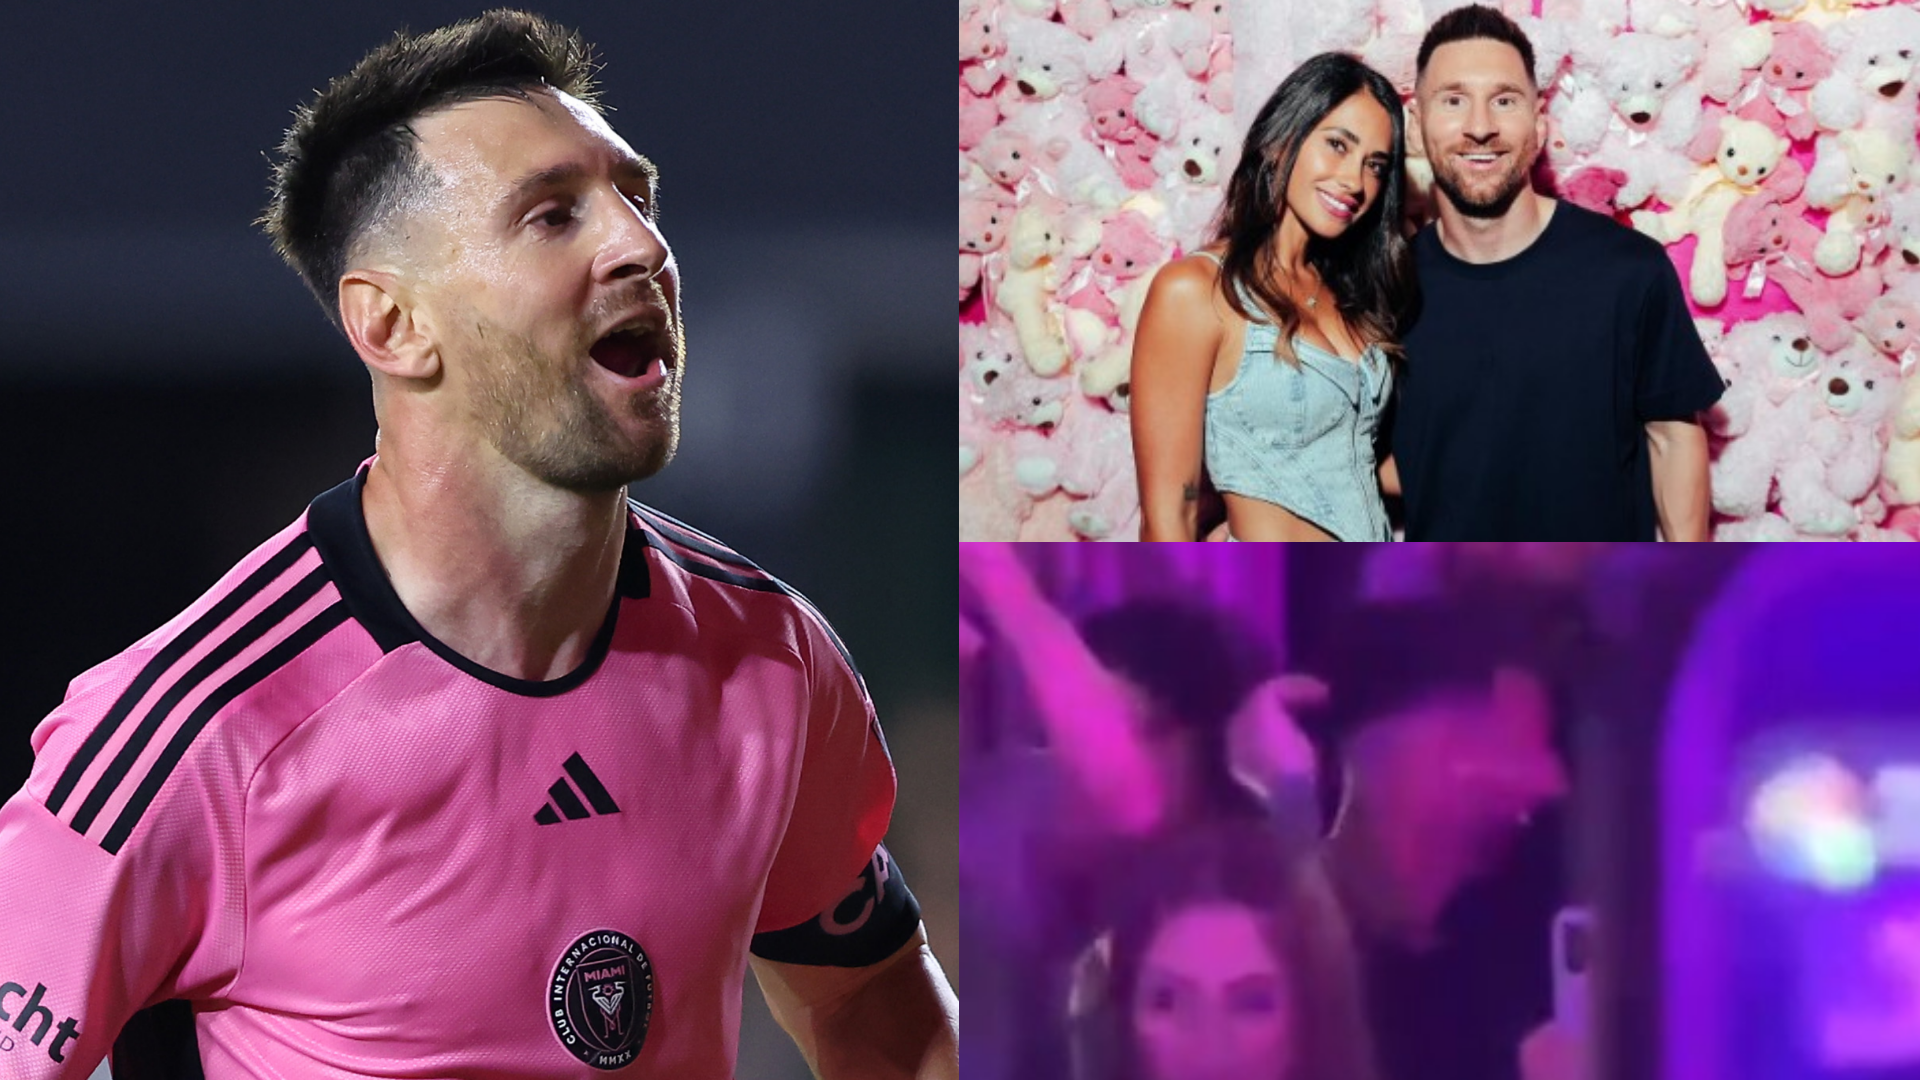 VIDEO: Lionel Messi lets loose! Inter Miami star dances along to Maria Becerra performance as he heads back to Bresh nightclub with wife Antonela Roccuzzo after latest MLS outing